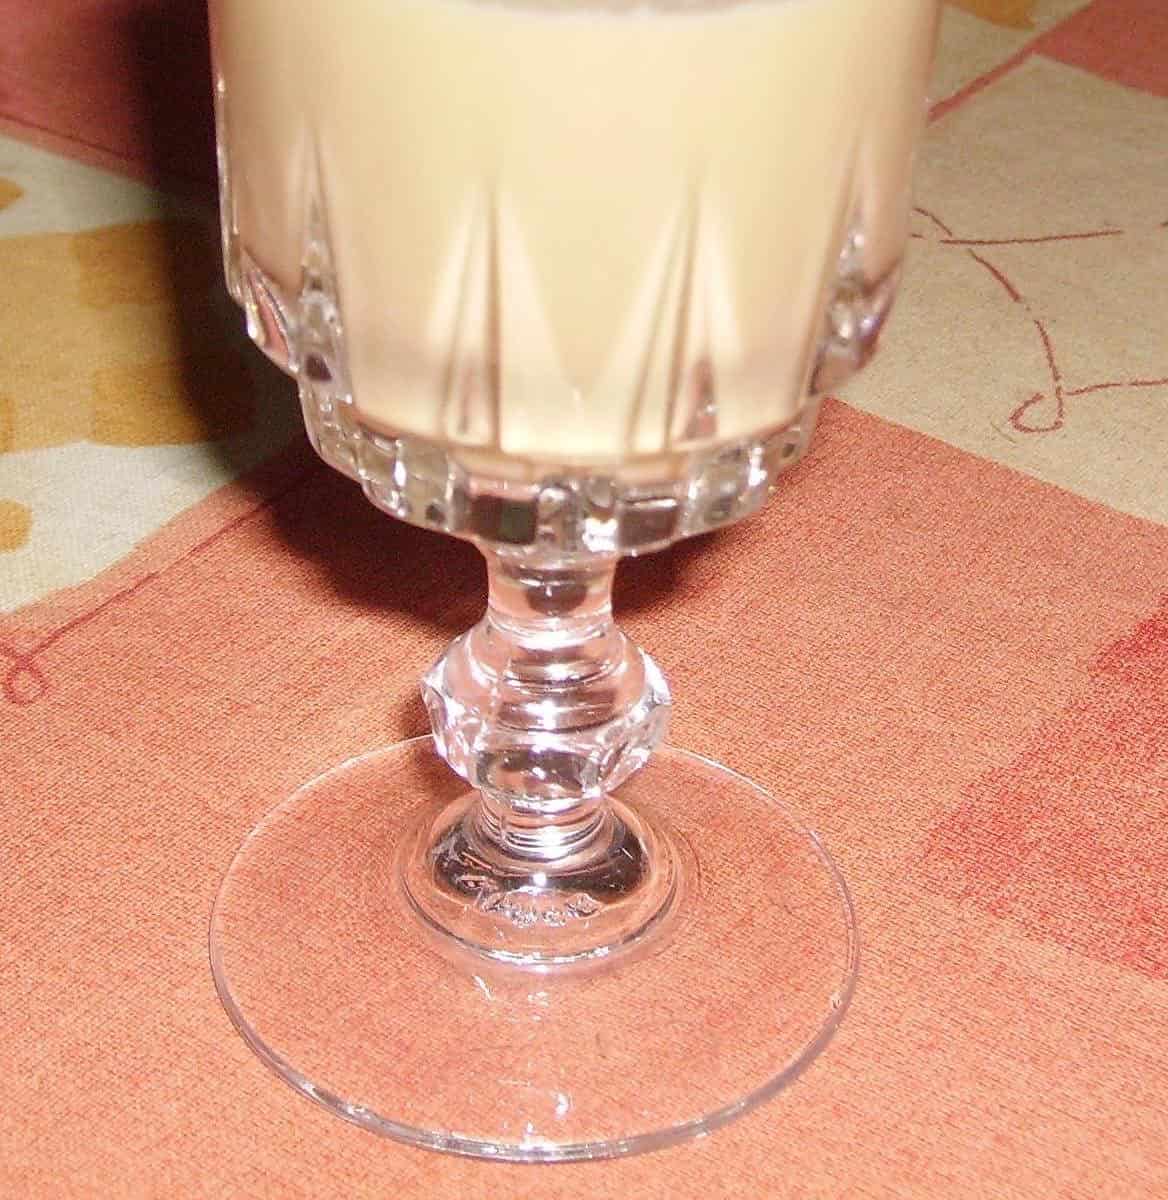  Creamy and delicious Irish cream without any alcohol!